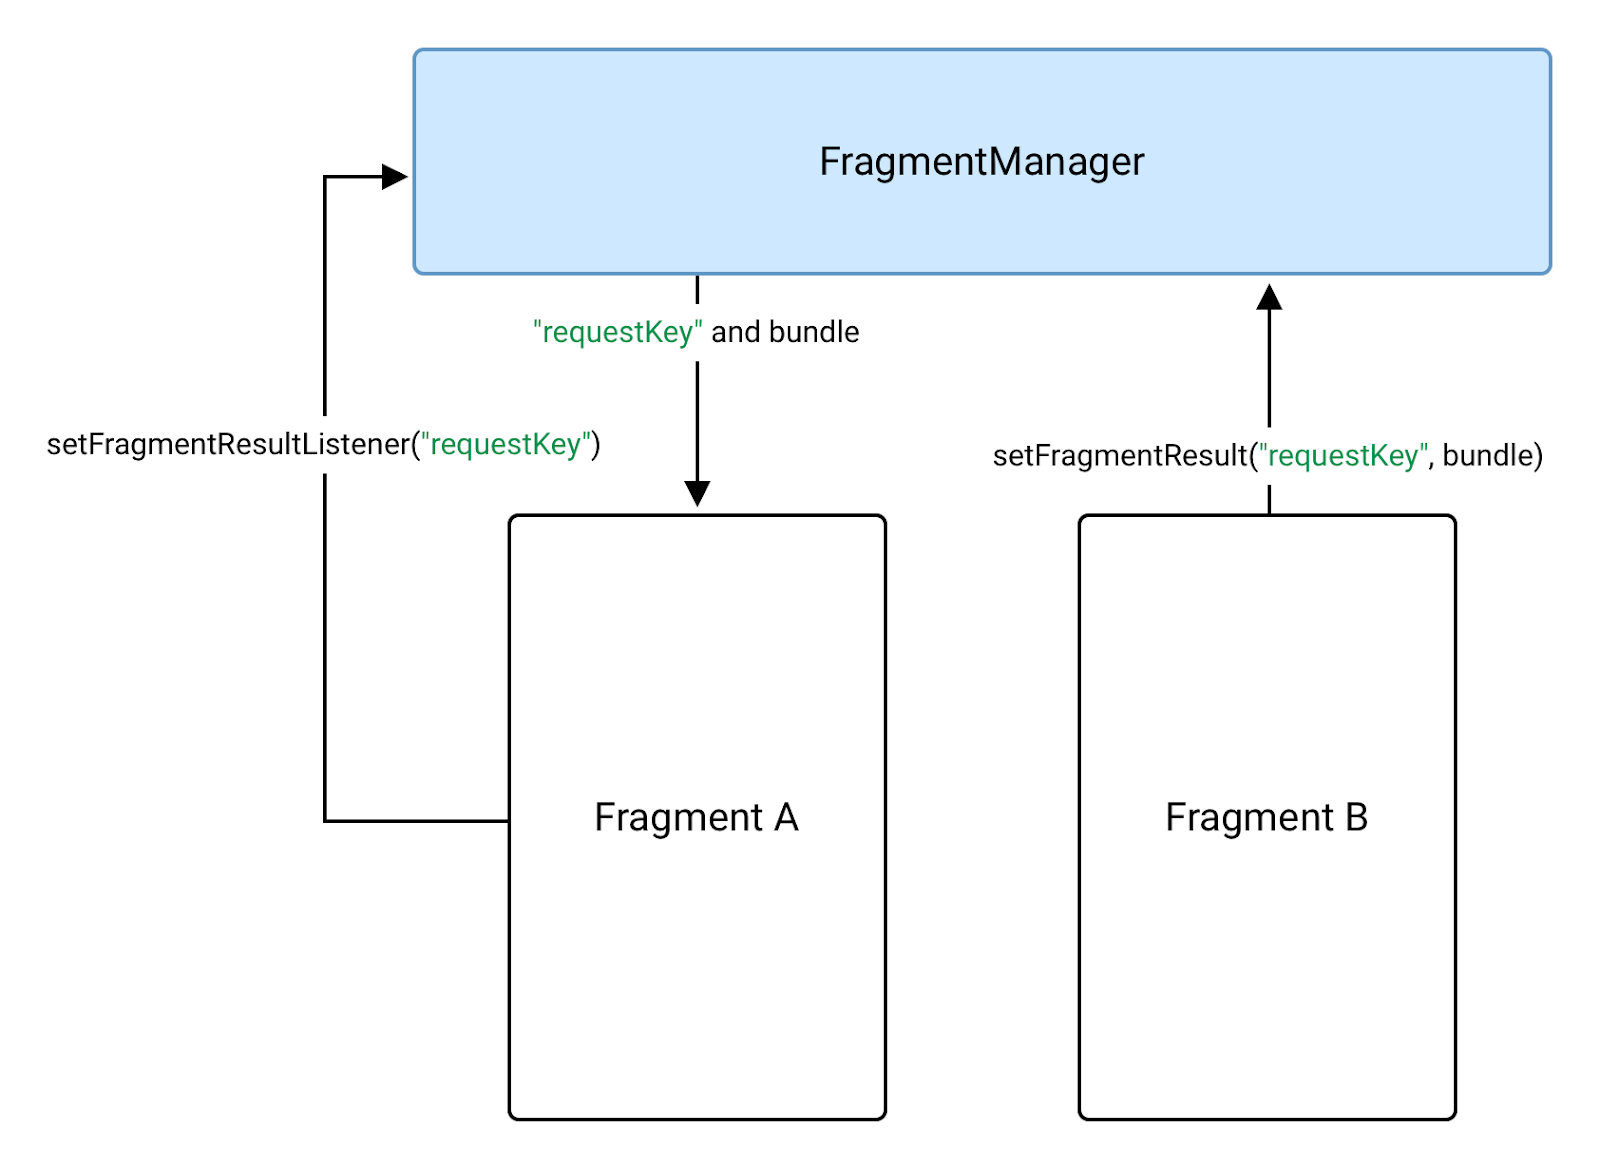 fragment b sends data to fragment a using a FragmentManager